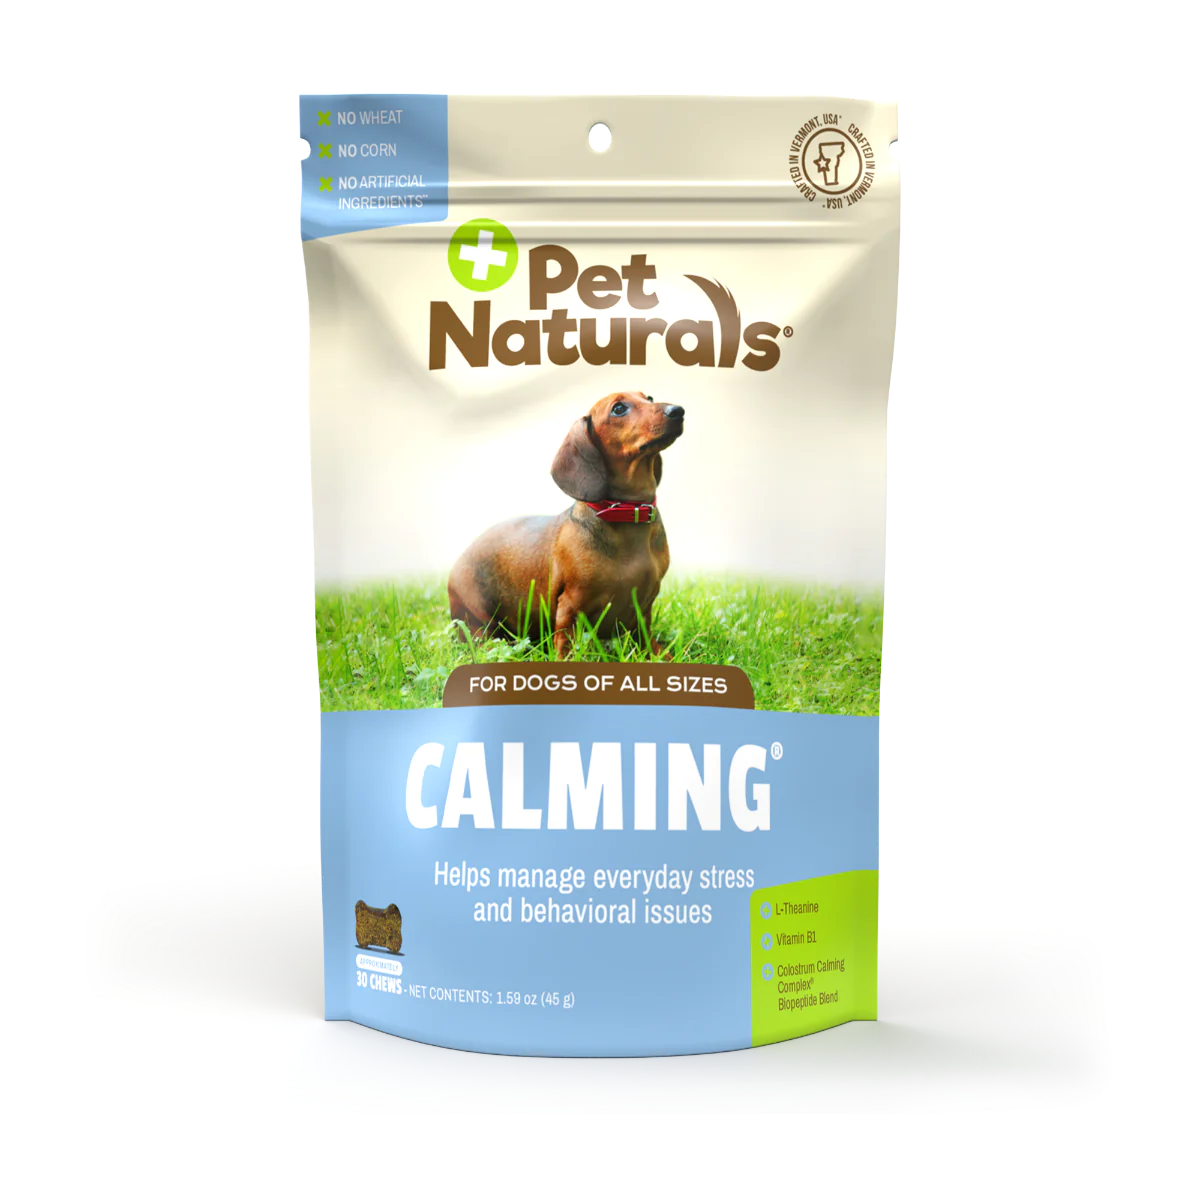 Pet Naturals - Calming Chew for Dogs (30 chews)